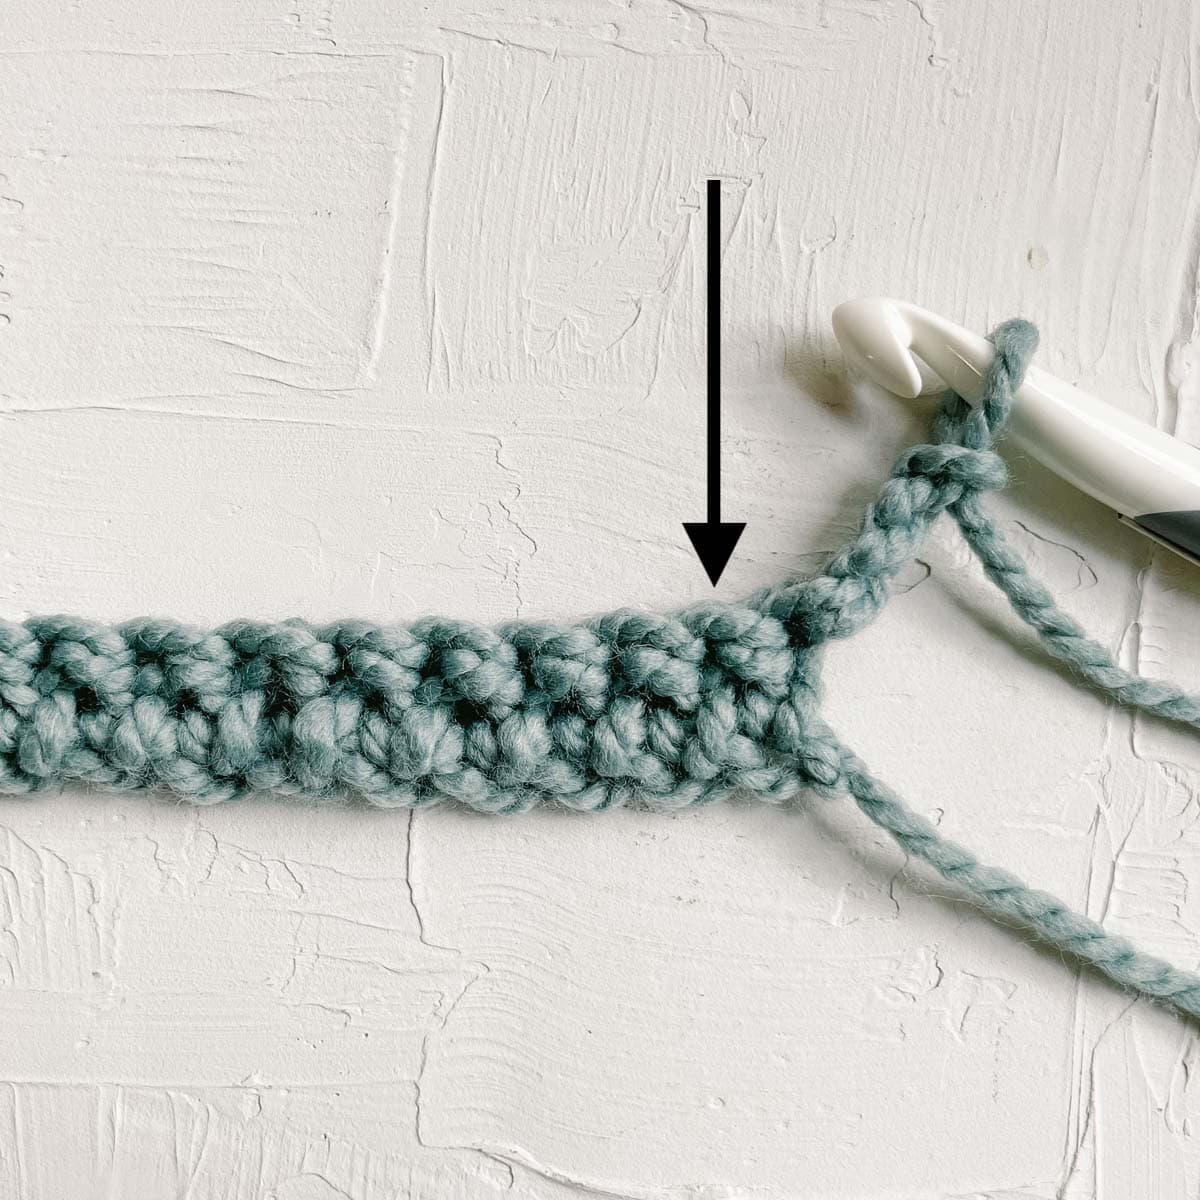 Arrow pointing to placement of first stitch in blanket row.